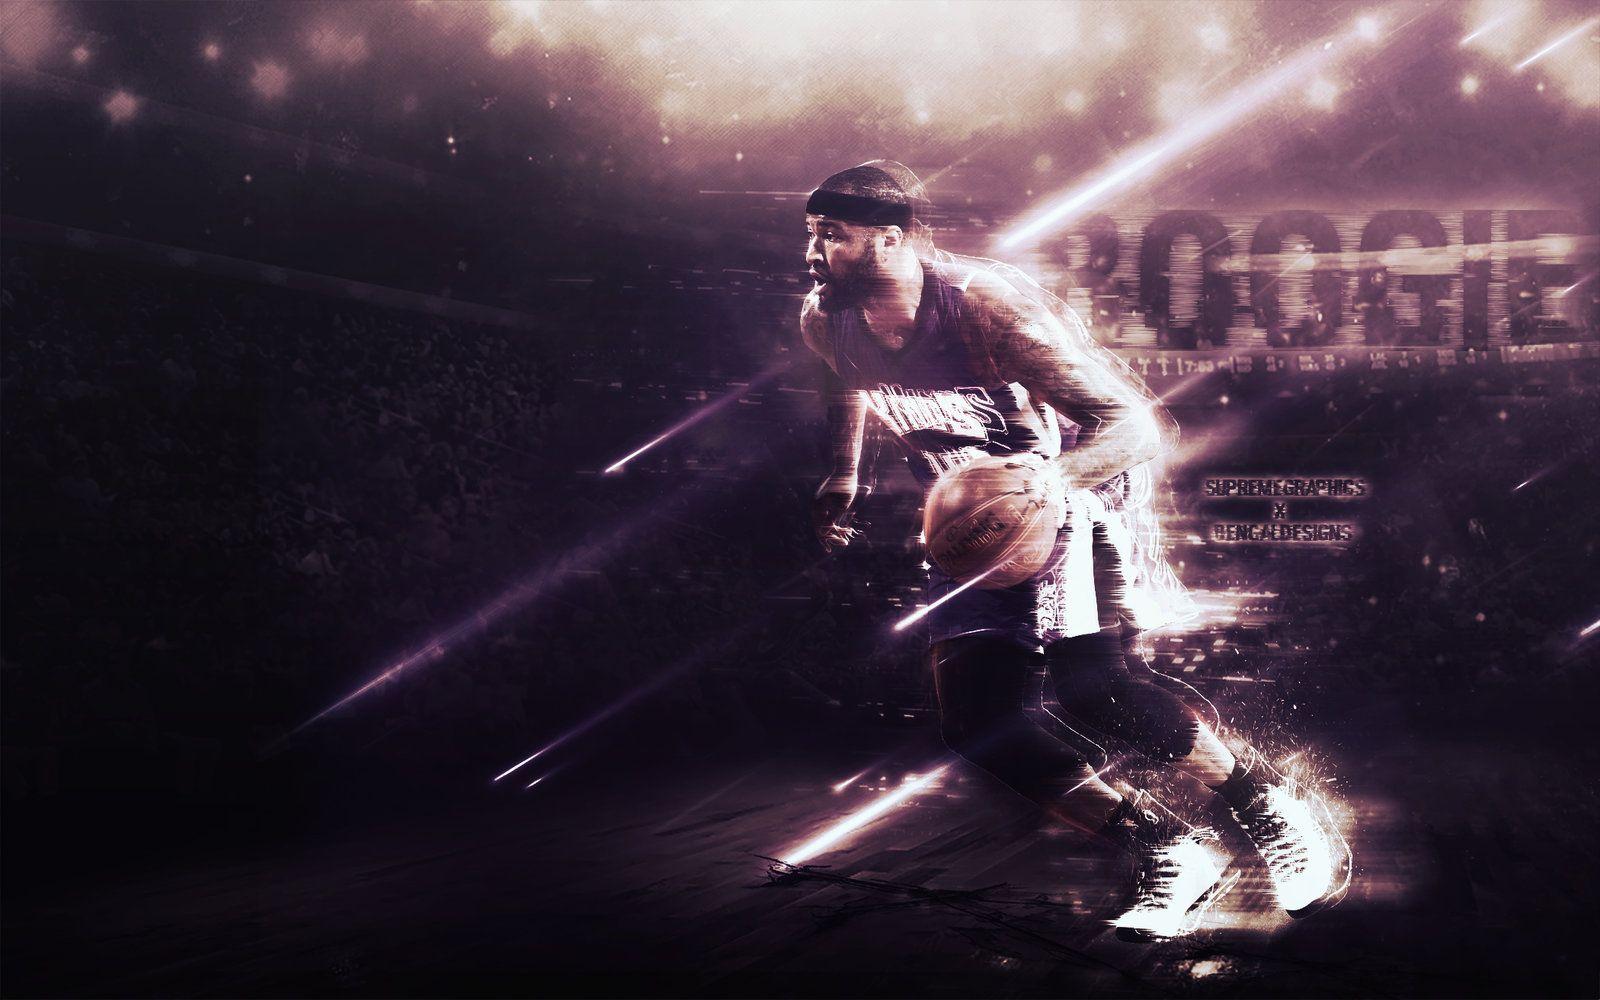 DeMarcus Cousins Wallpaper HD Collection For Free Download